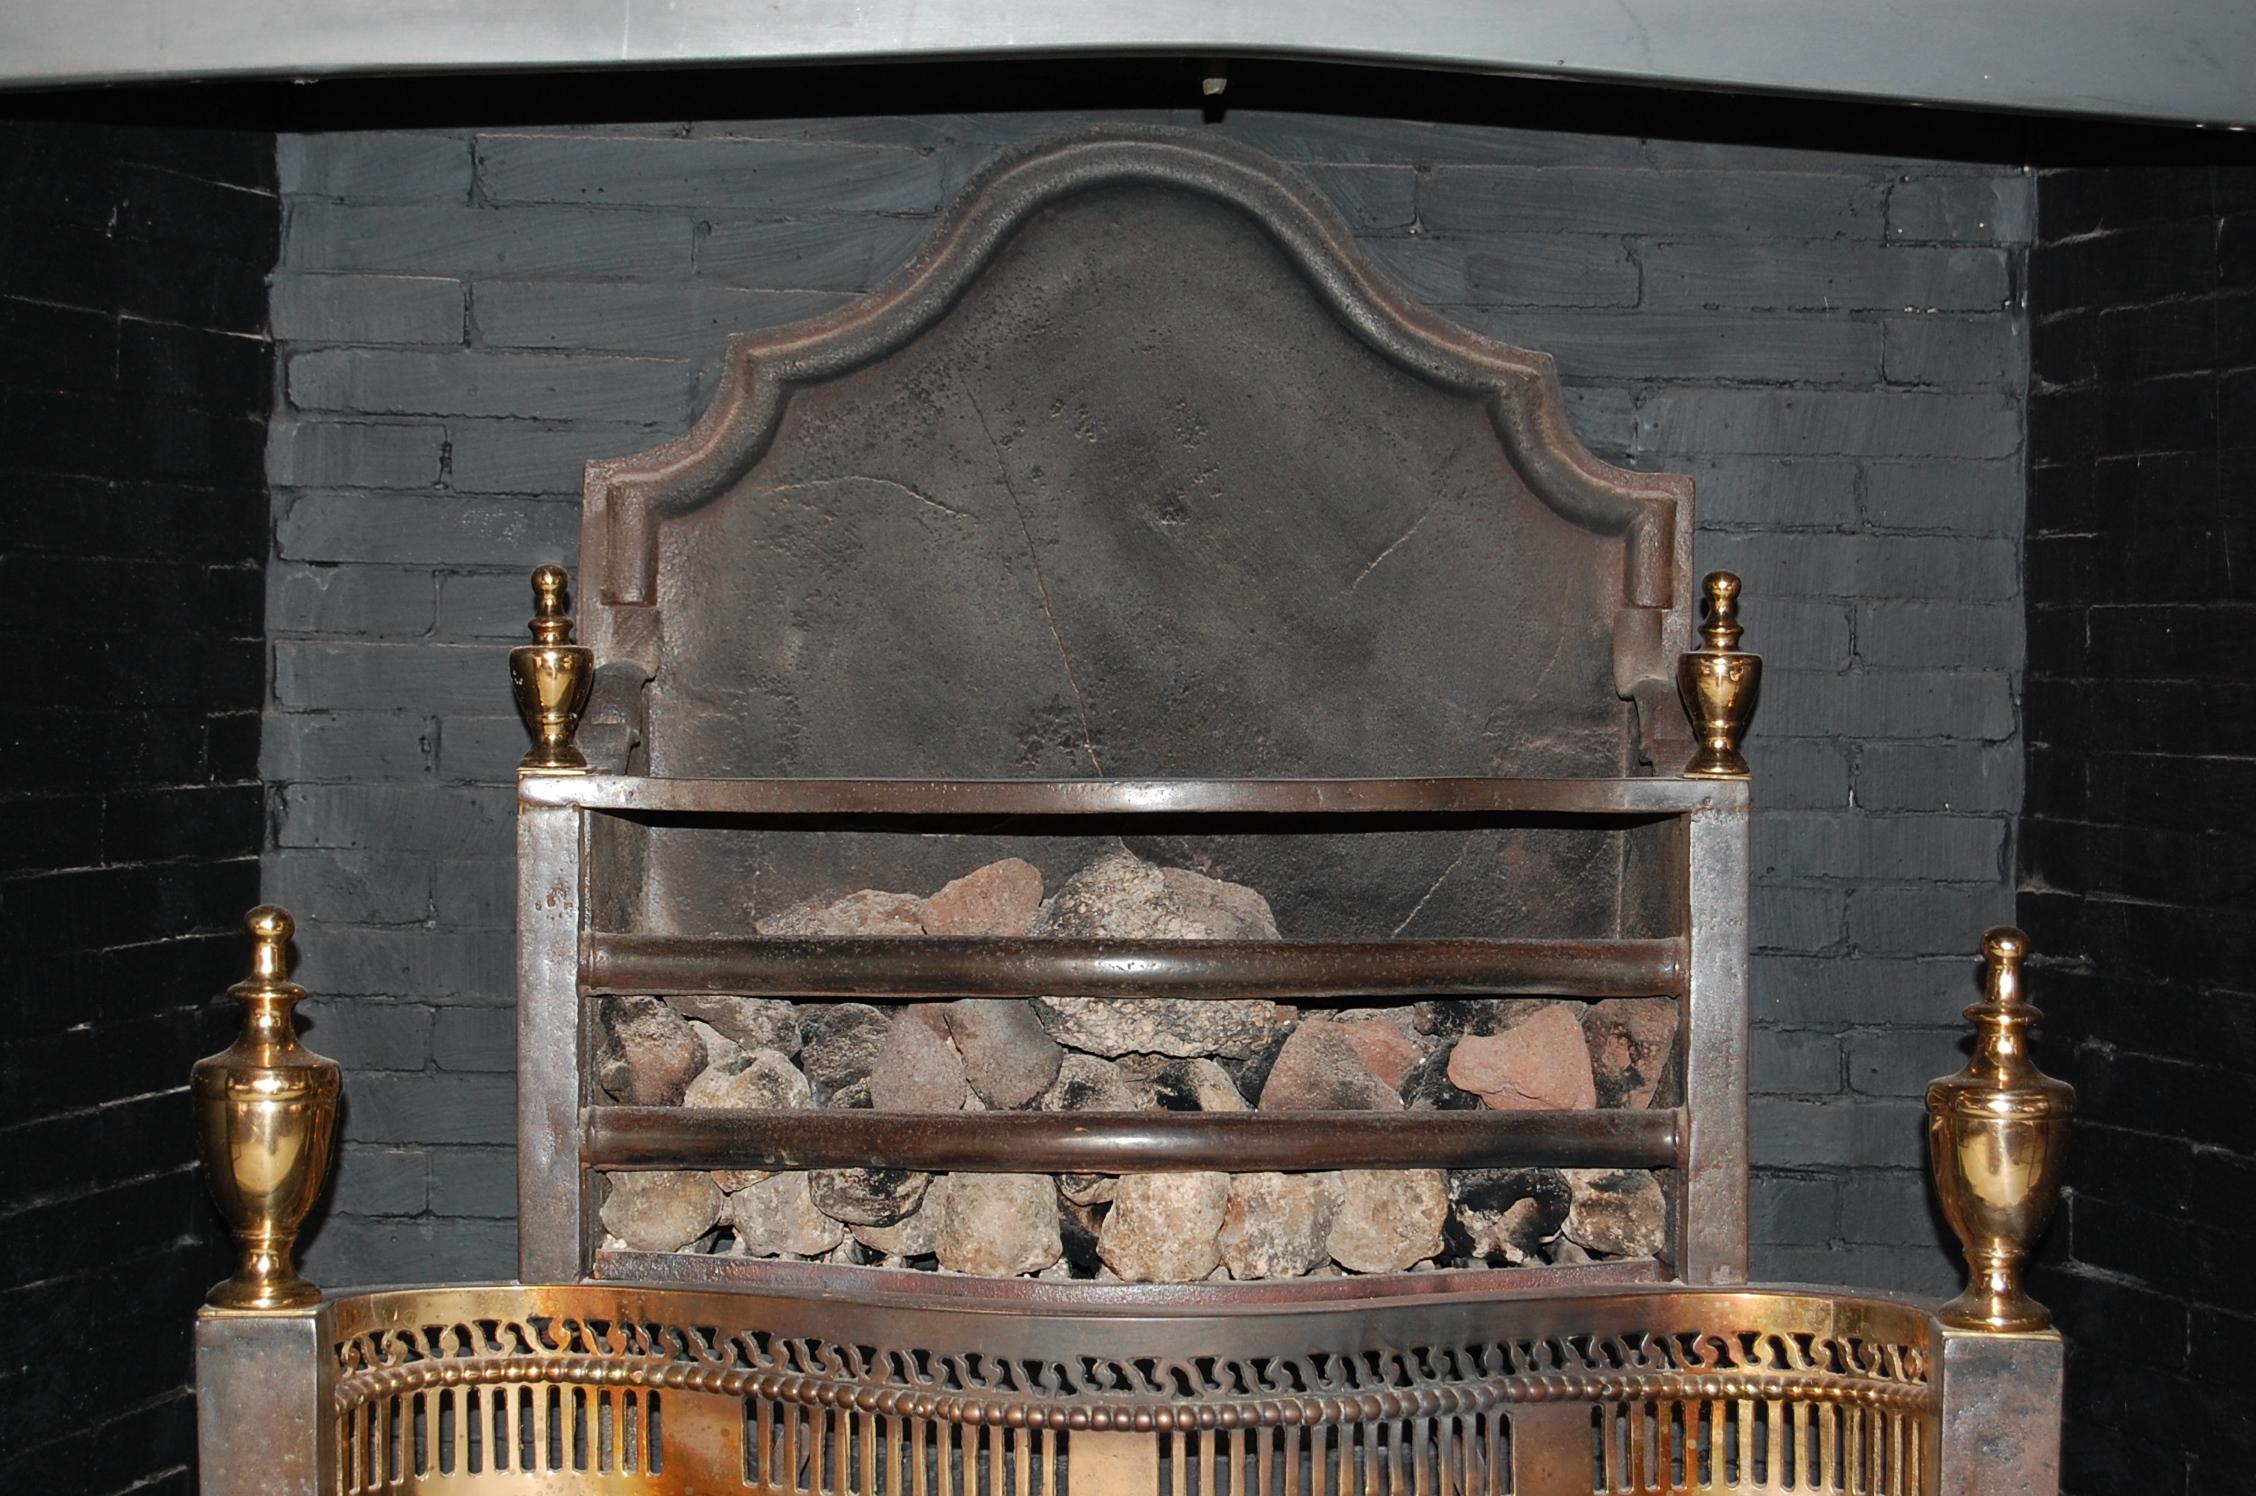 British Mid-19th Century English Cast Iron, Steel and Brass Fireplace Insert For Sale